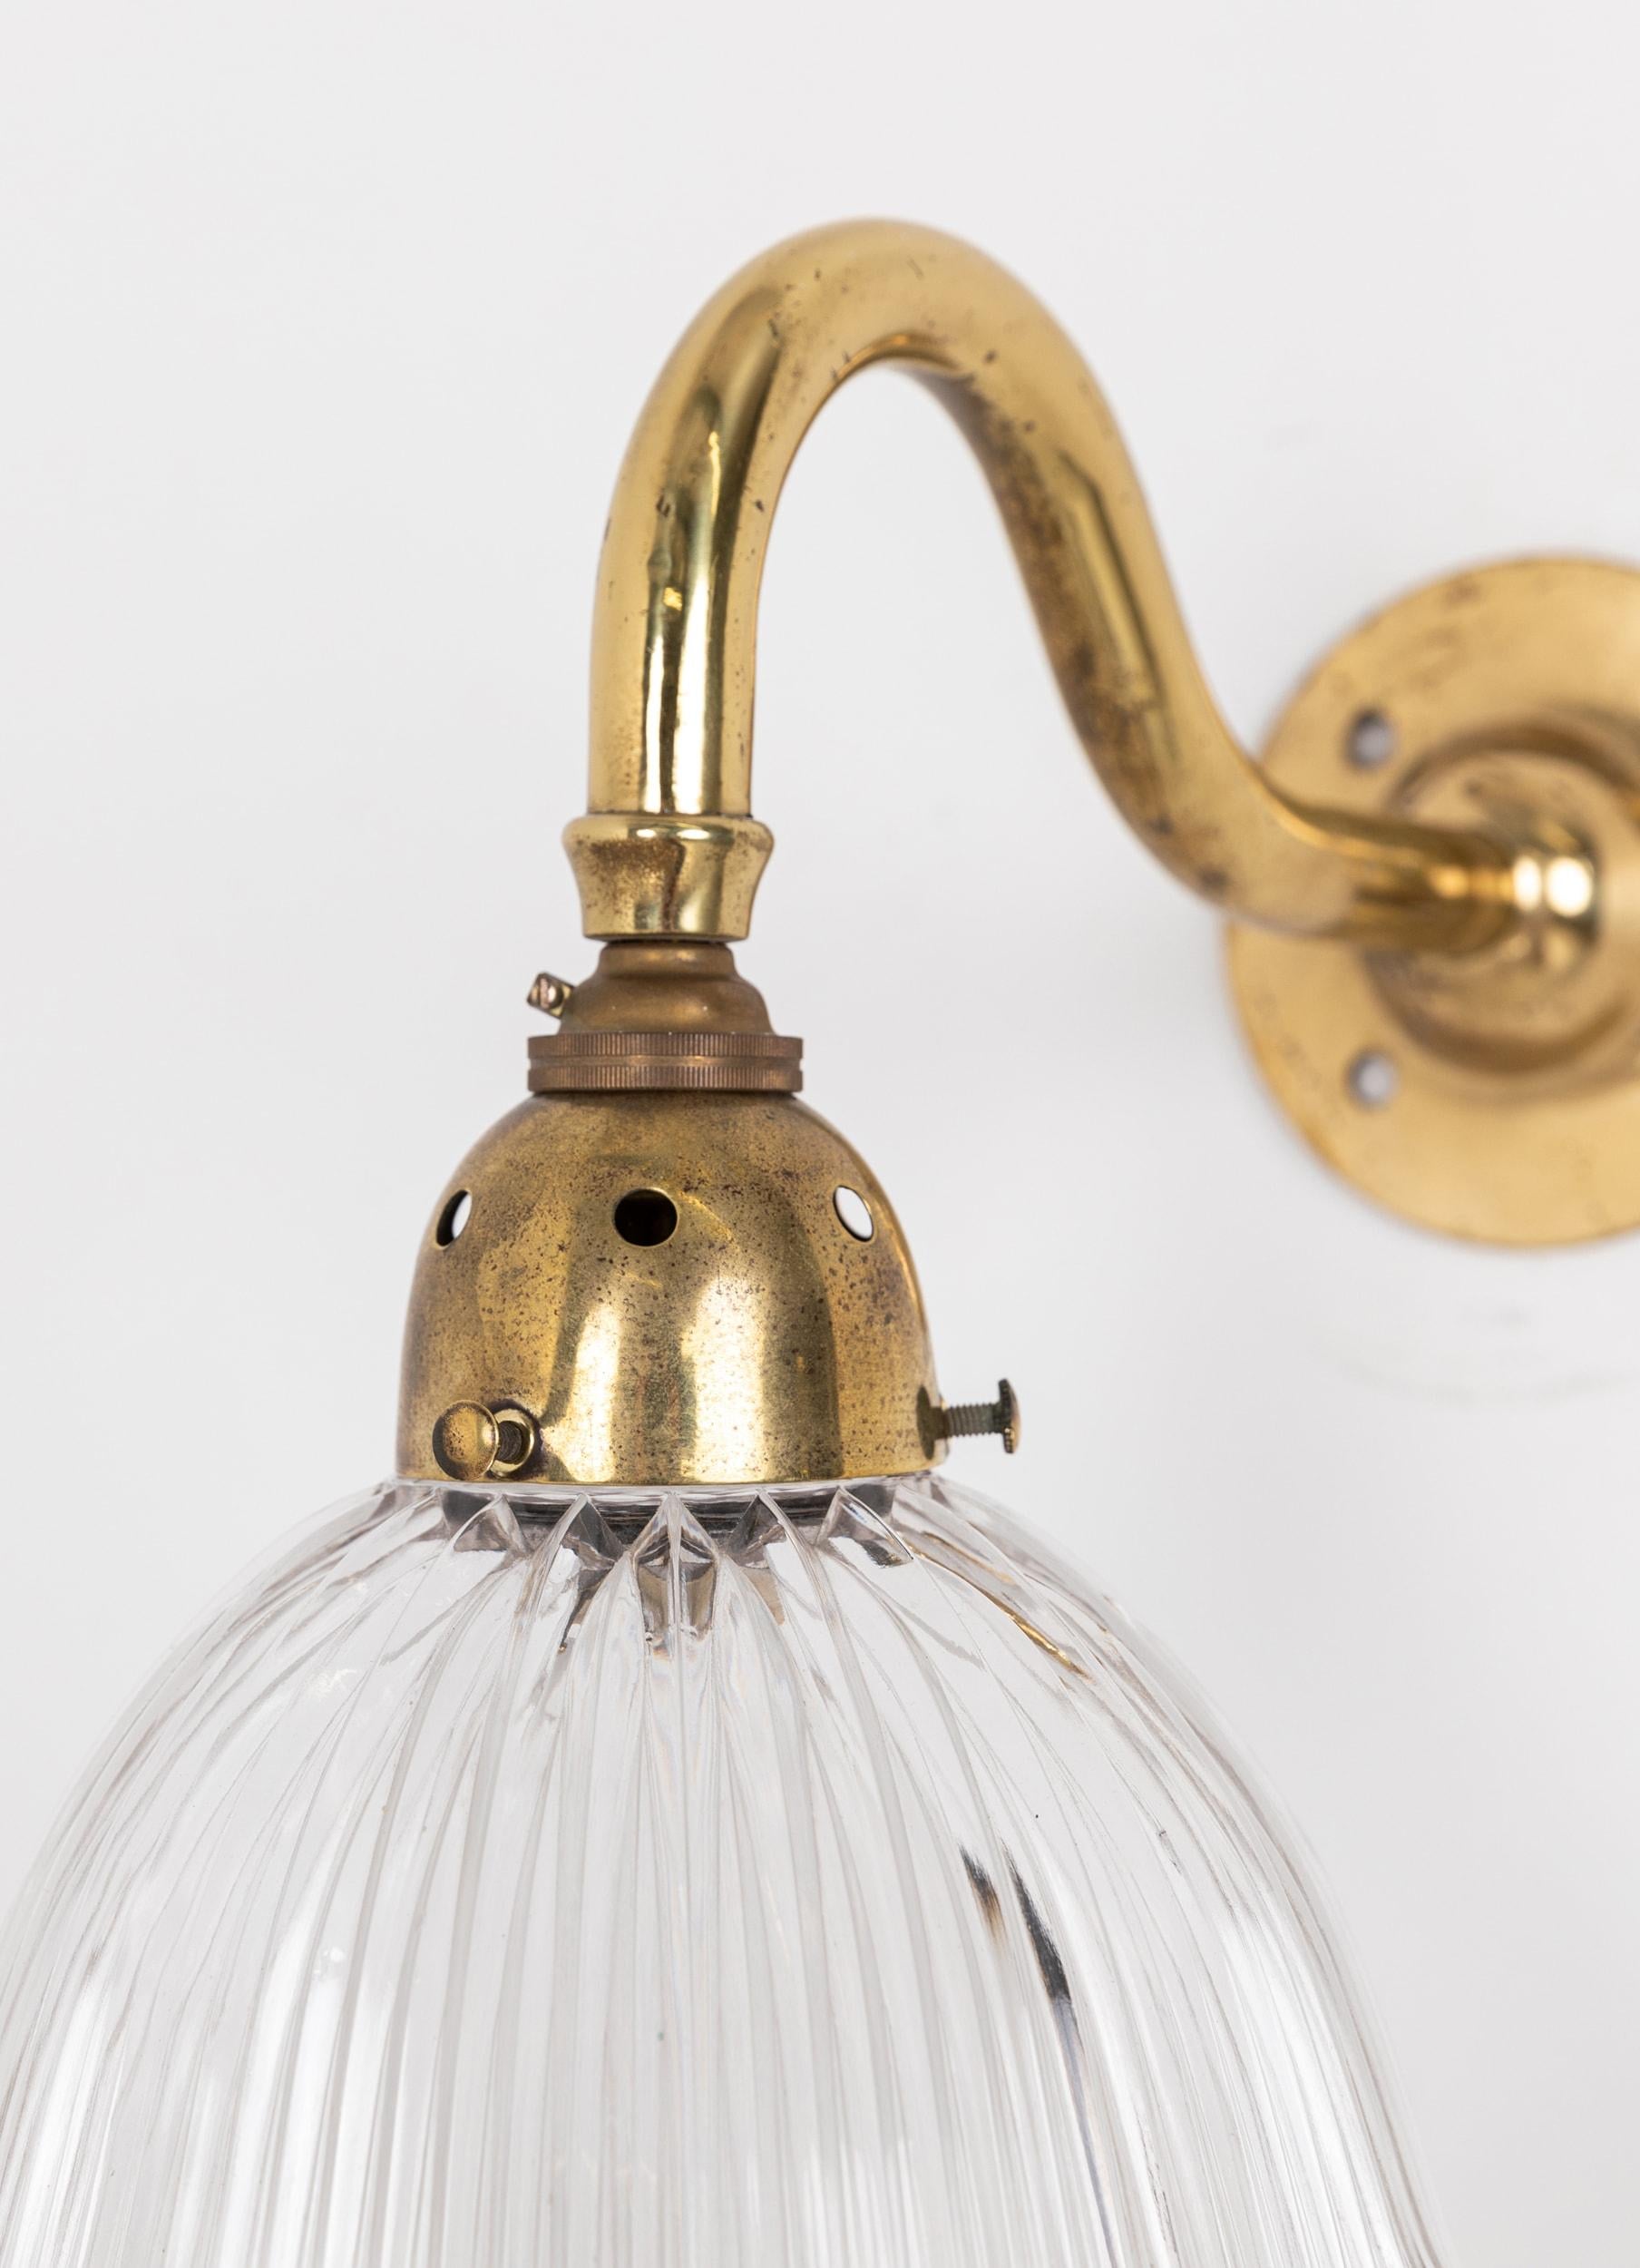 A superb wall mounted light made in England by Holophane. c.1920

The prismatic glass frilly 'Stiletto' shade made by Holophane, stamped to rim, and simple brass swan neck wall bracket.
